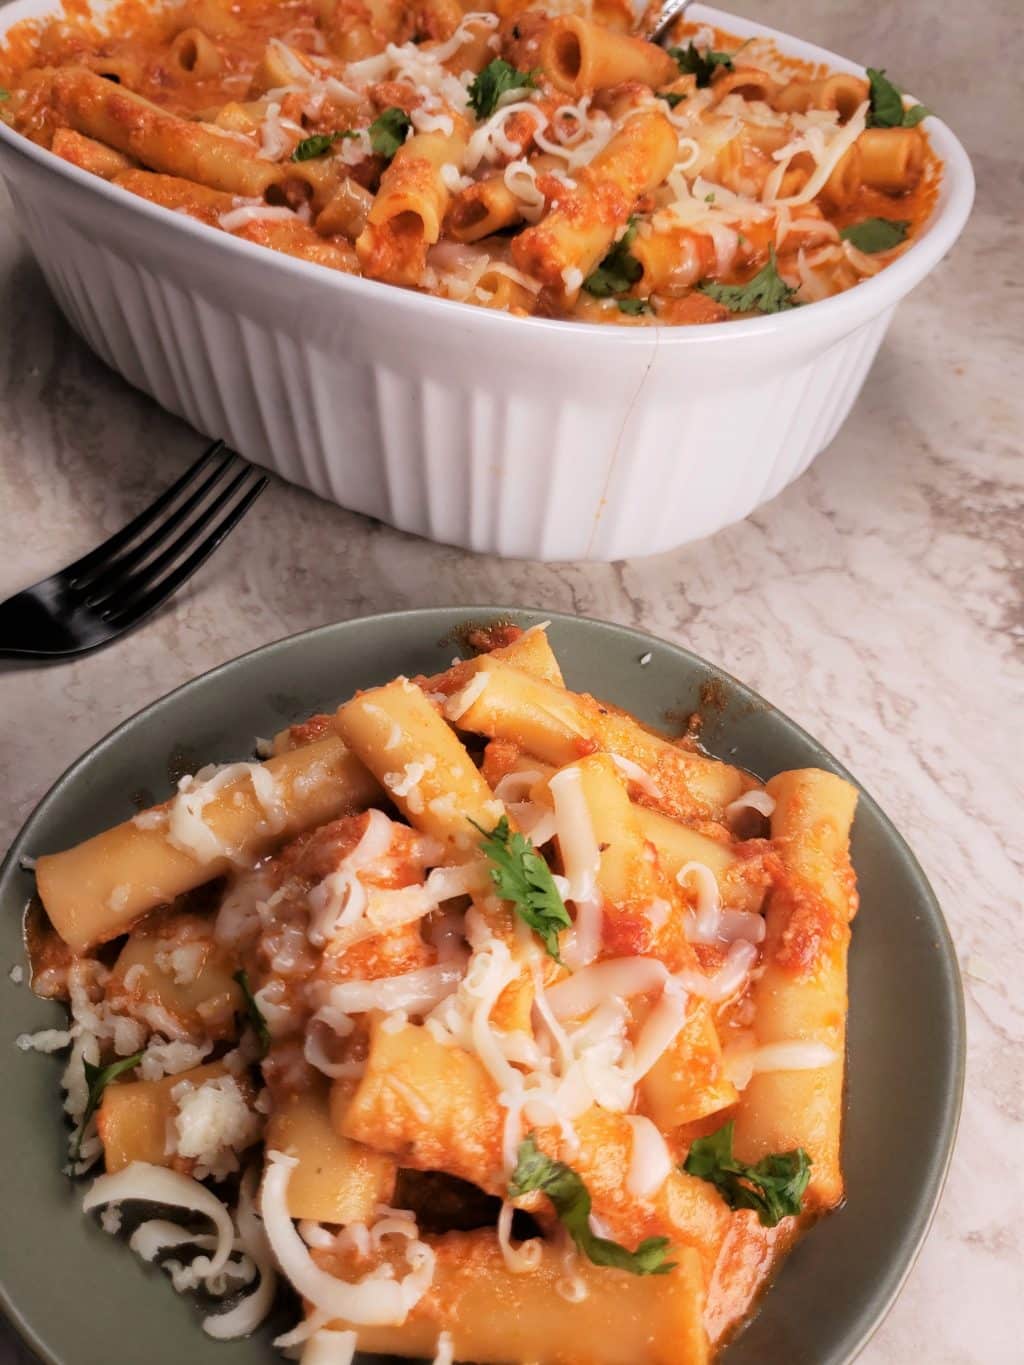 Discover the Essential Ingredients for Making Mouth-Watering Baked Ziti